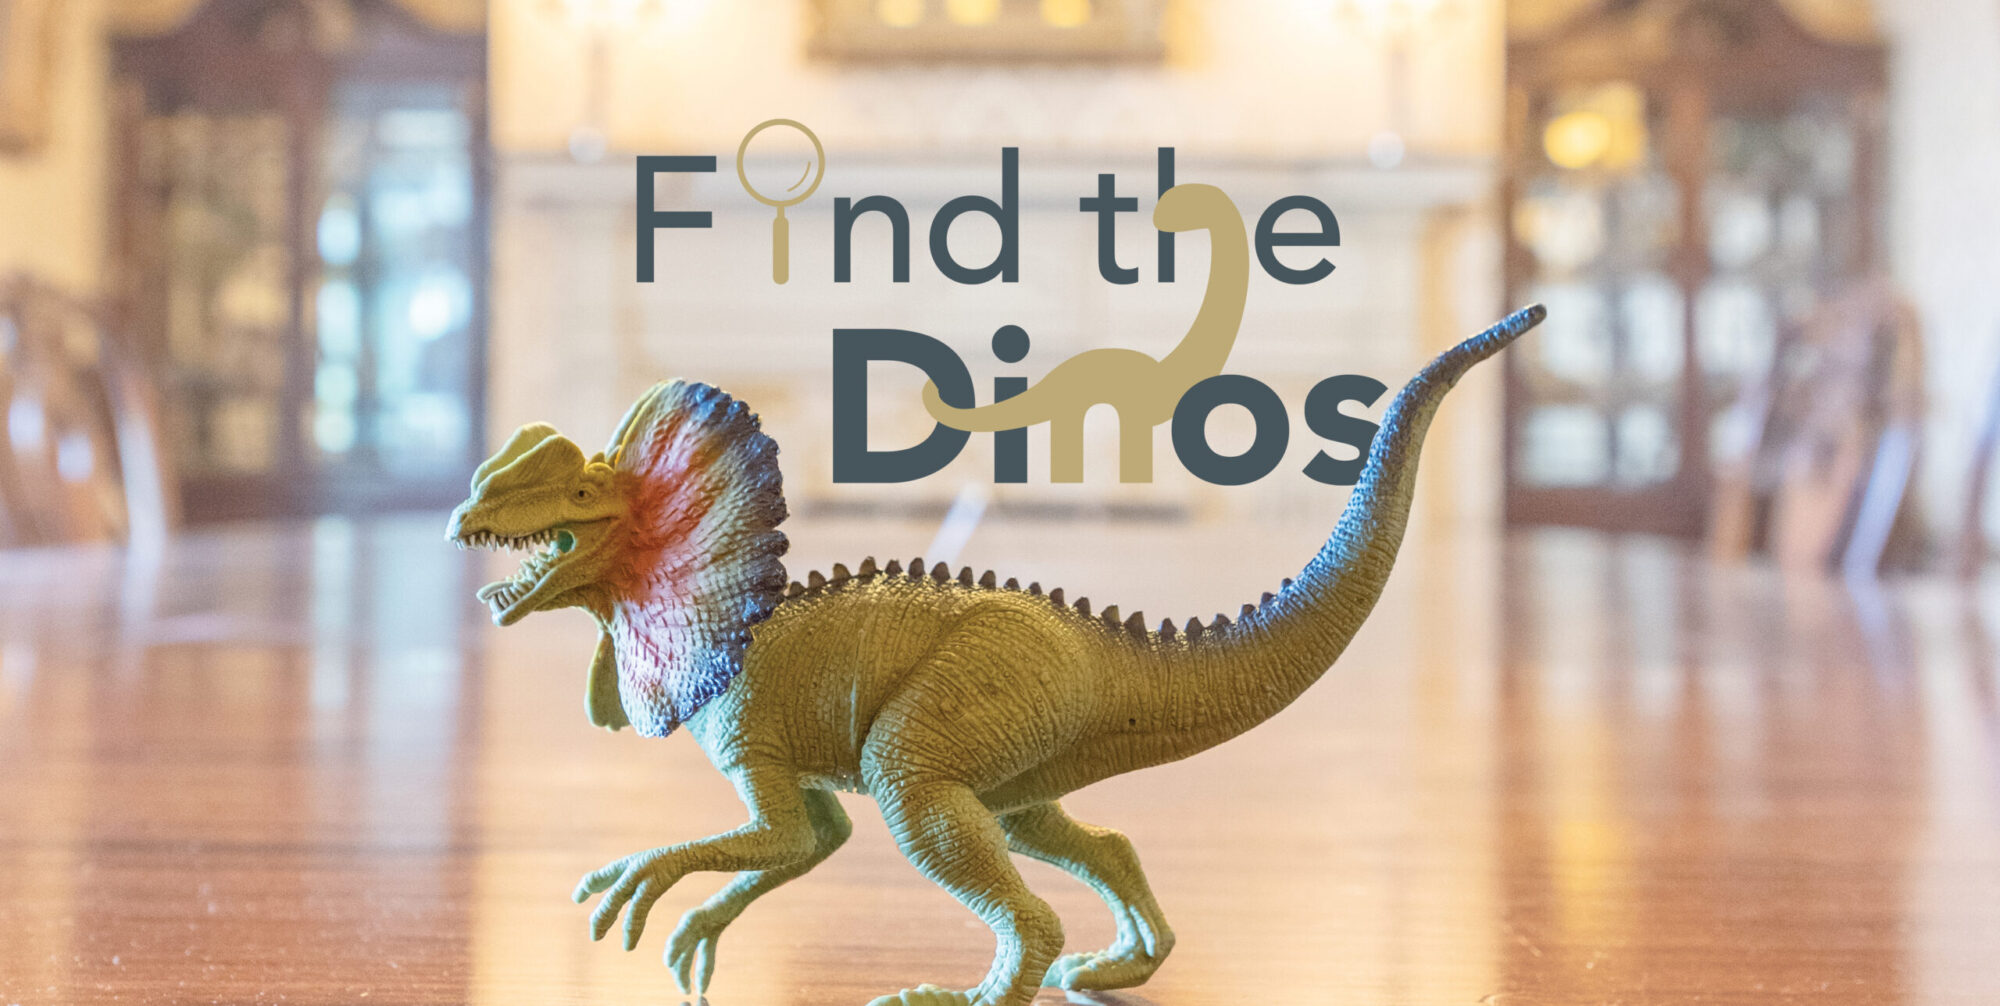 A dinosaur toy sits on a wooden table with the text "Find the dinos".